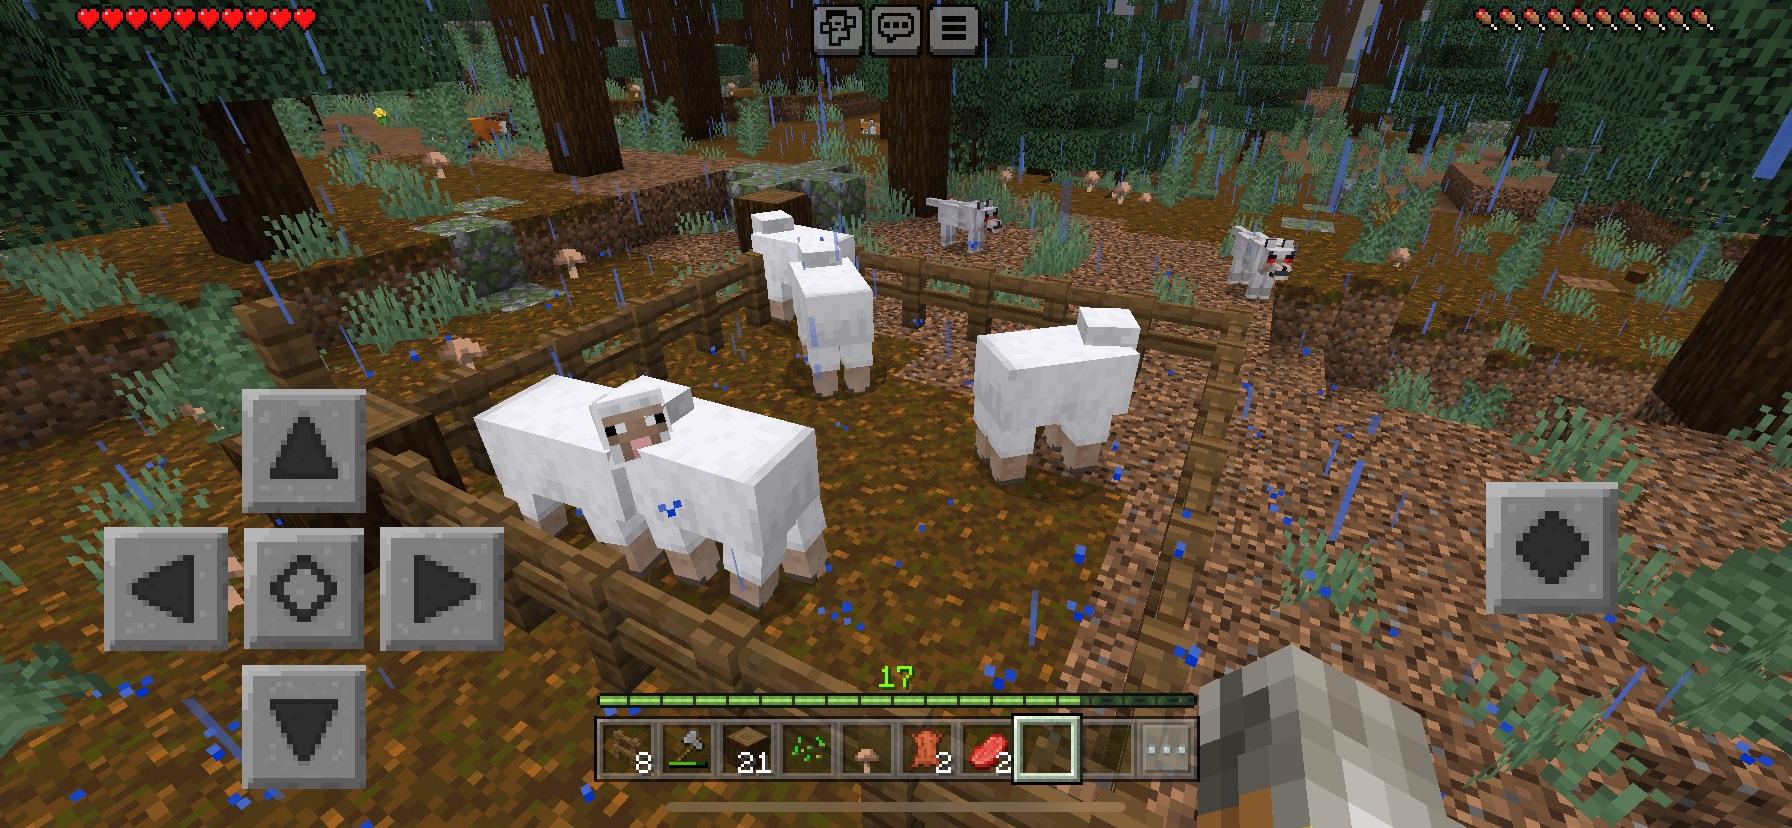 Minecraft Memes - "Protective Fence for Sheep Loving"